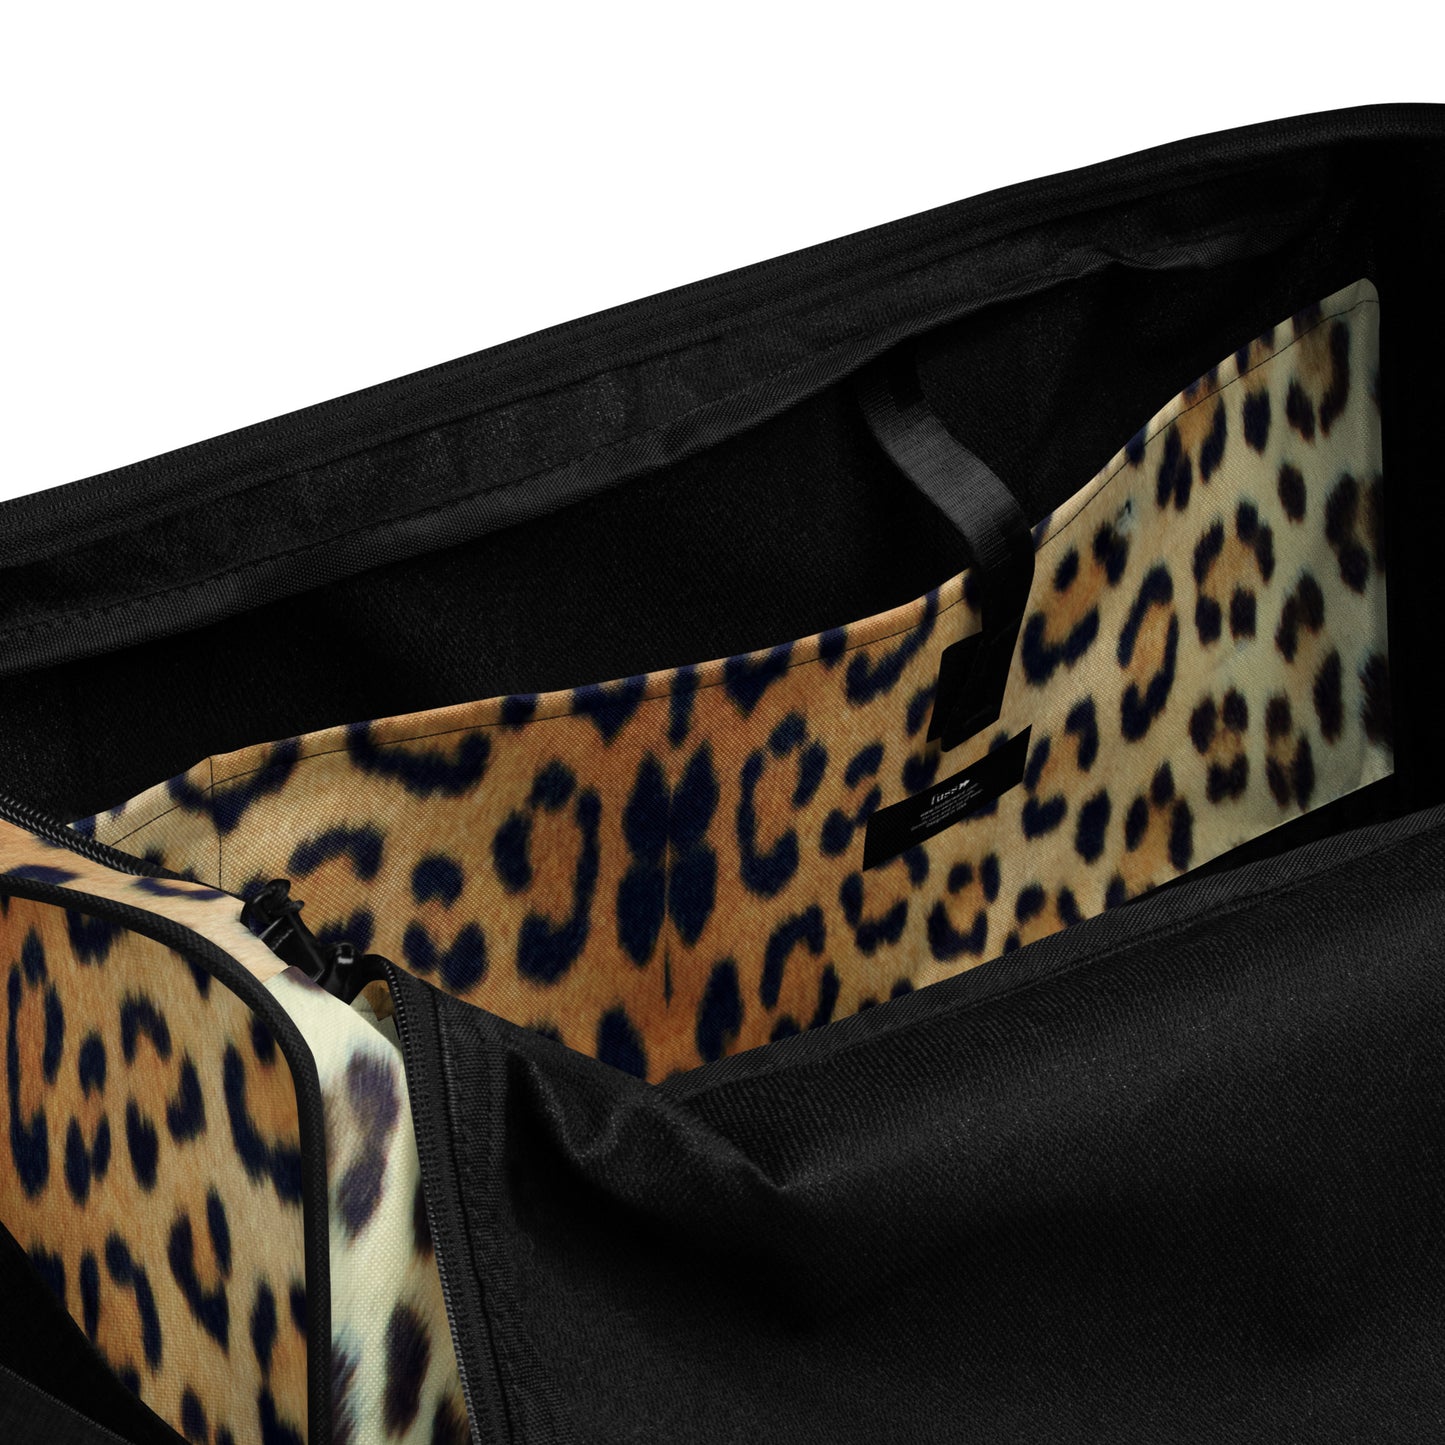 Personalized Monogrammed  Duffle Bag in Leopard  Design